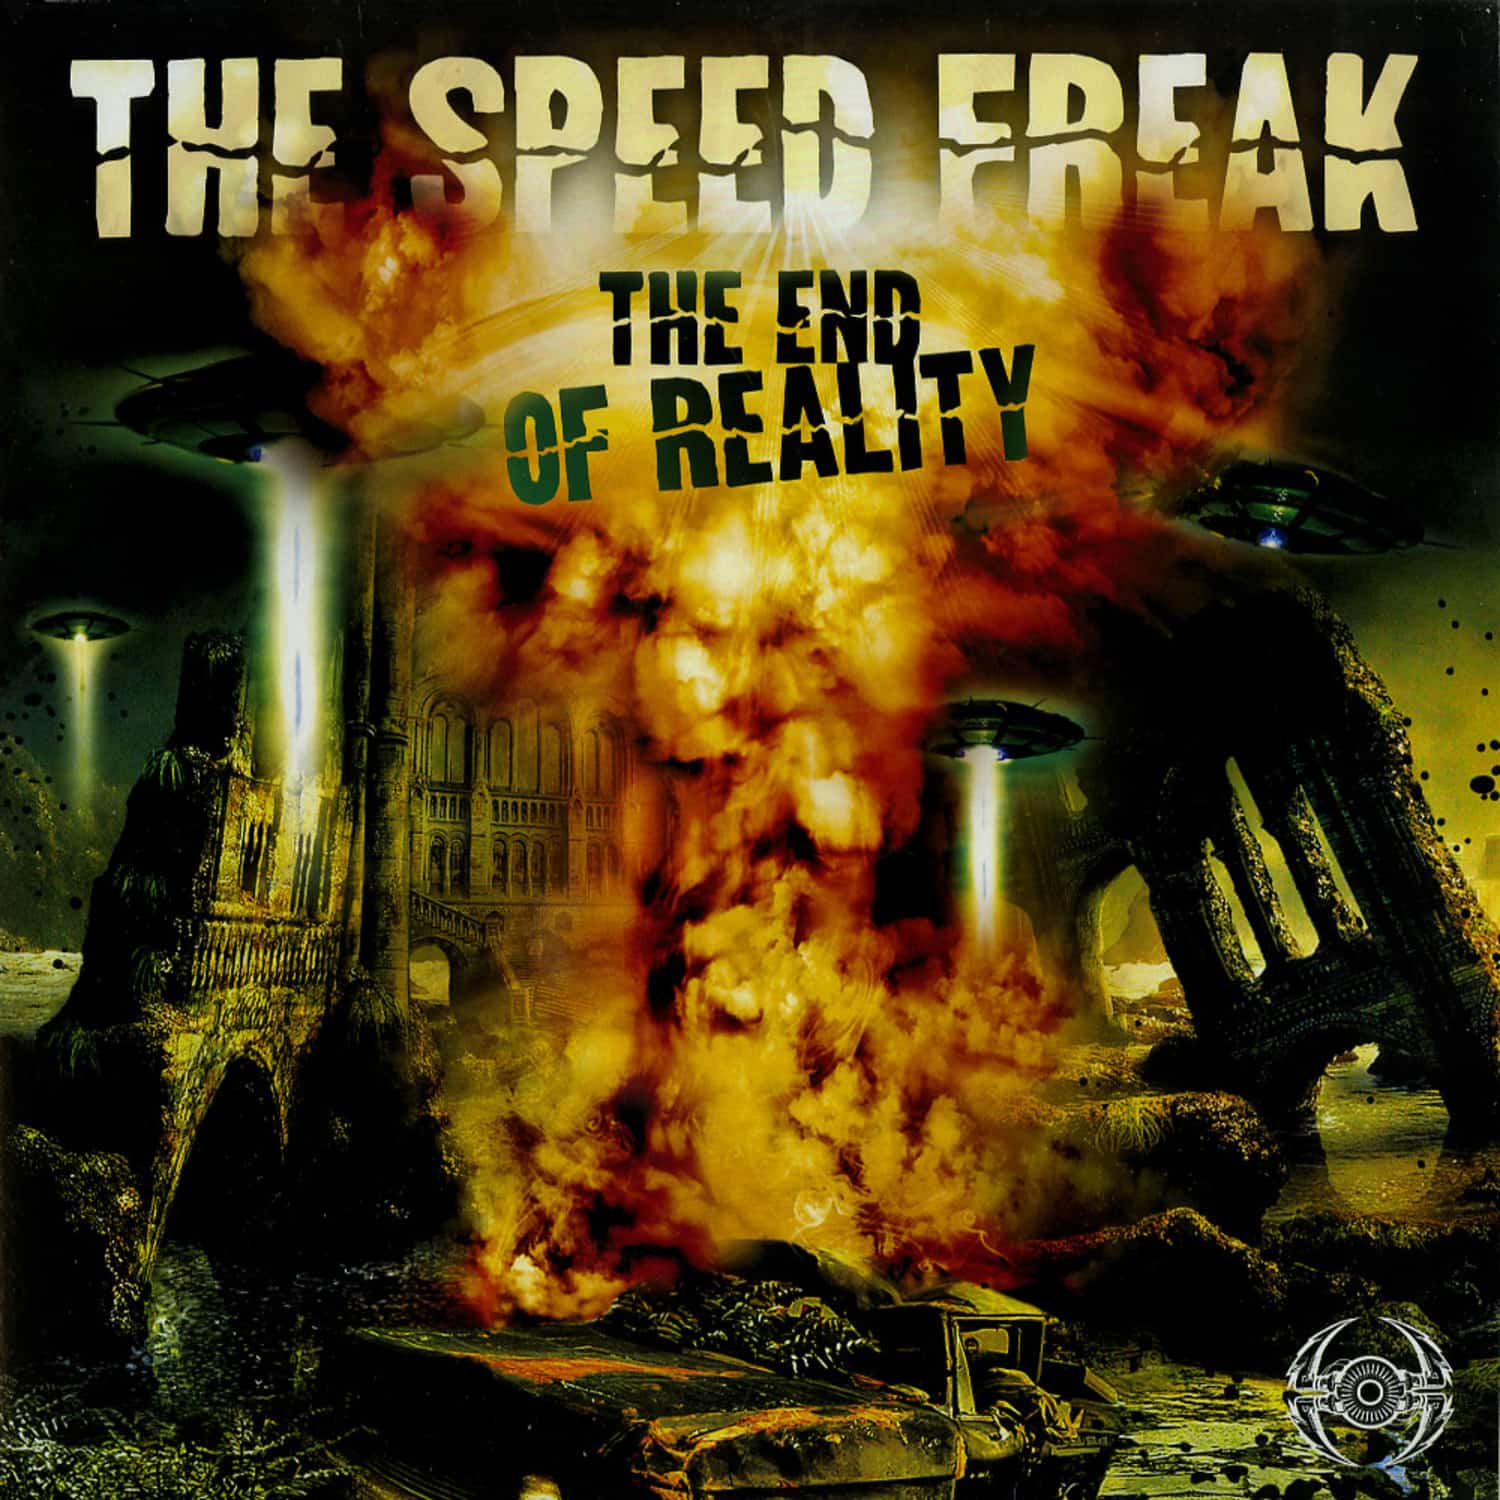 The Speed Freak - THE END OF REALITY 